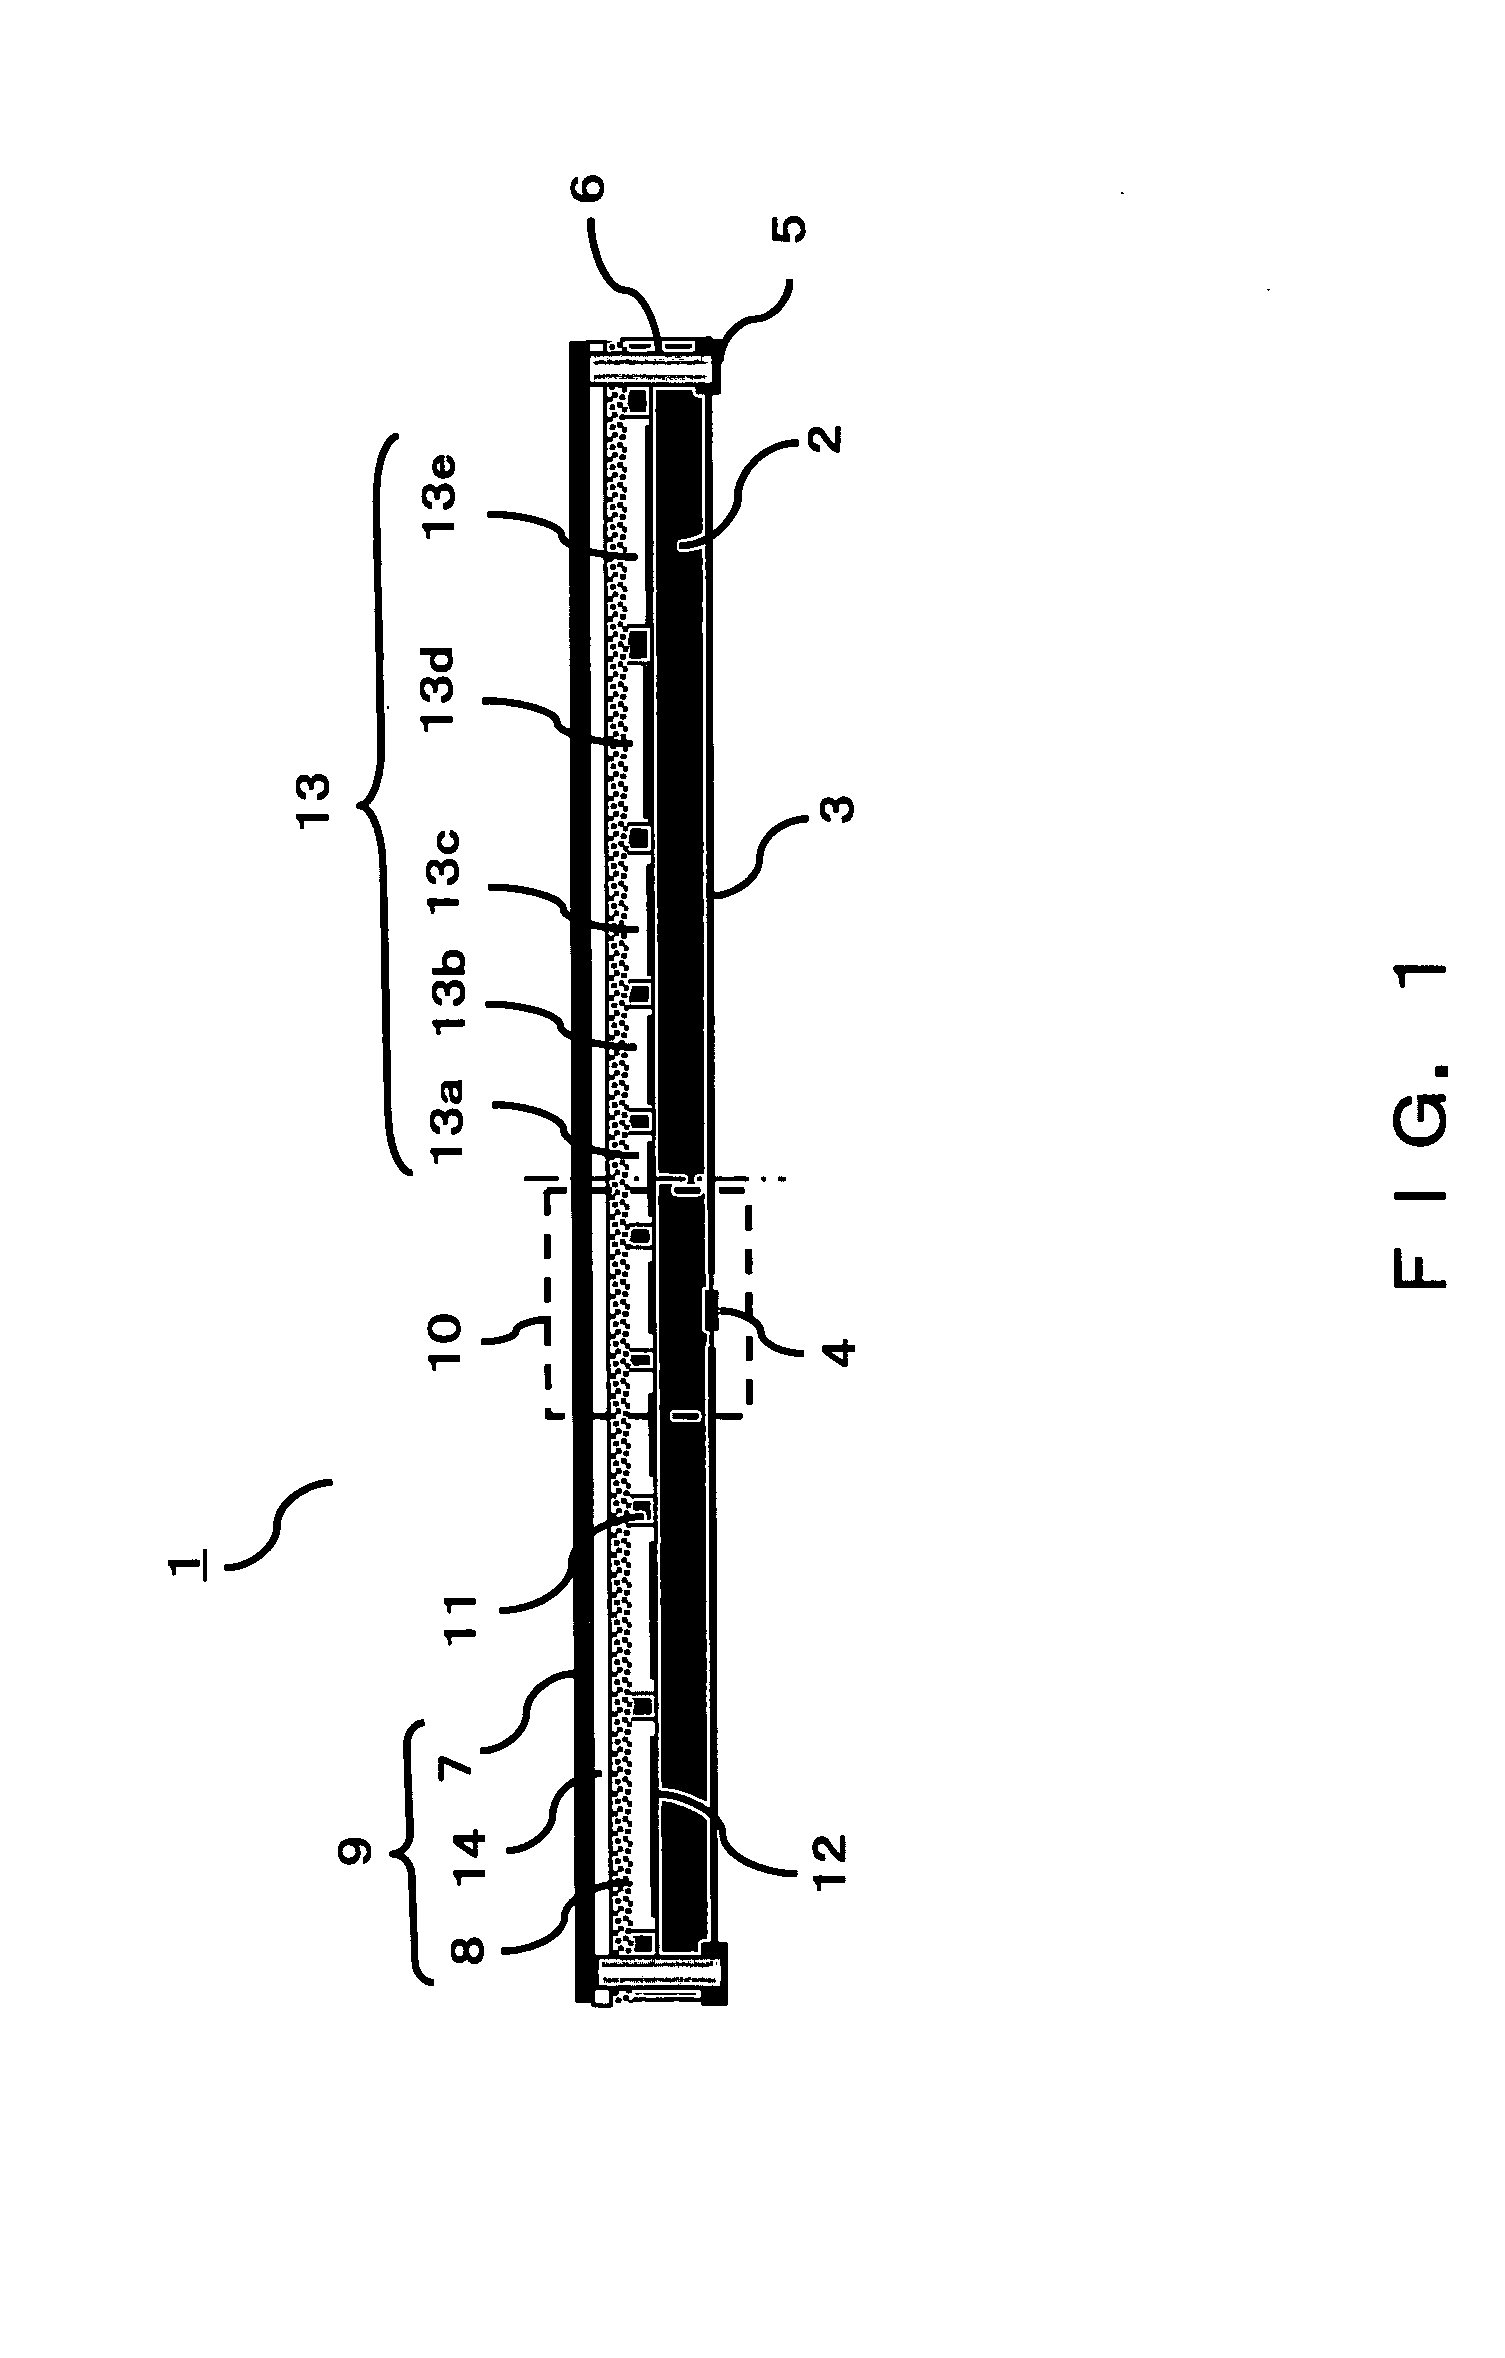 Capacitive micromachined ultrasonic transducer